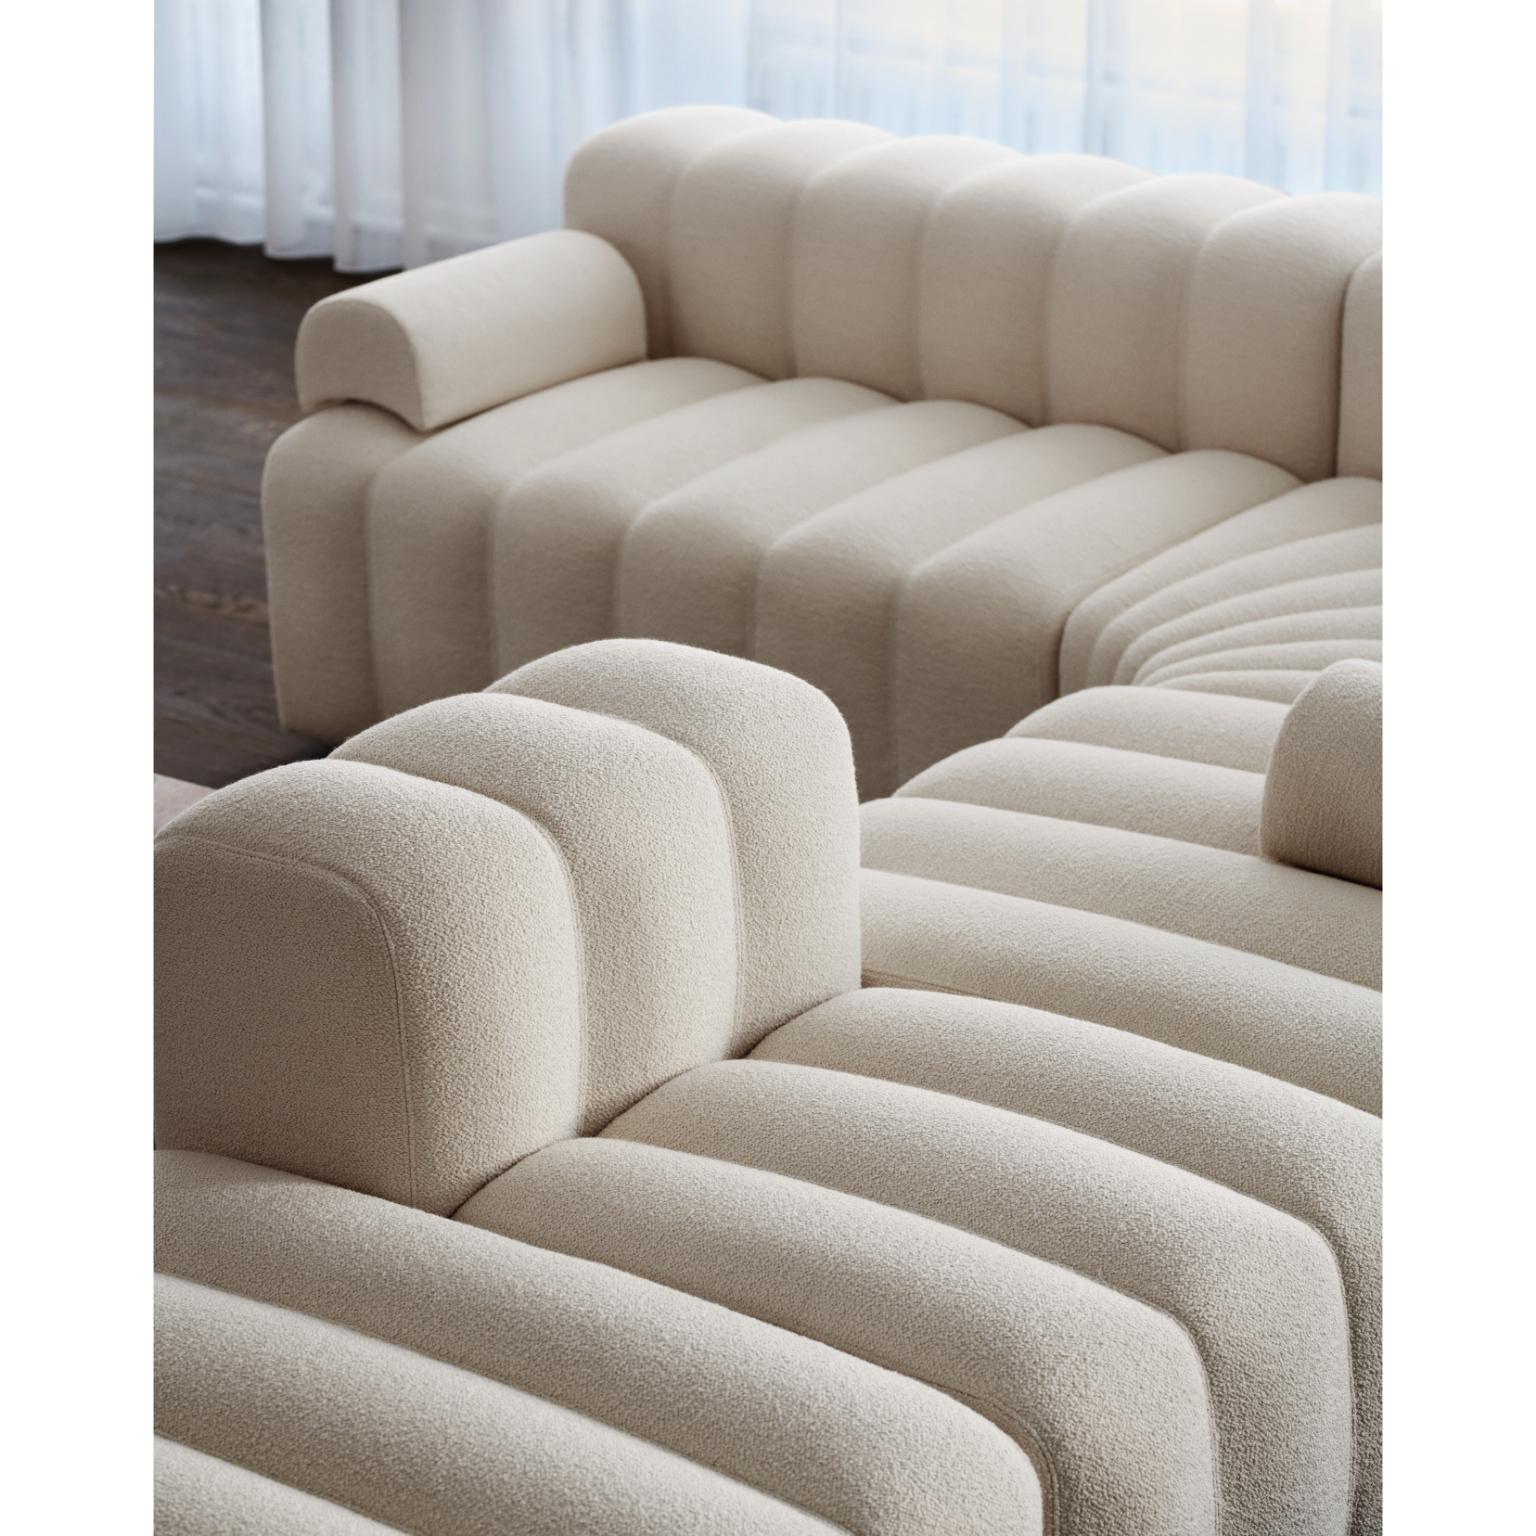 Studio Lounge Large Left Modular Sofa With Armrest by NORR11
Dimensions: D 130 x W 153 x H 70 cm. SH 47 cm. 
Materials: Foam, wood and upholstery.
Upholstery: Barnum Boucle Color 3.

Available in different upholstery options. A plywood structure